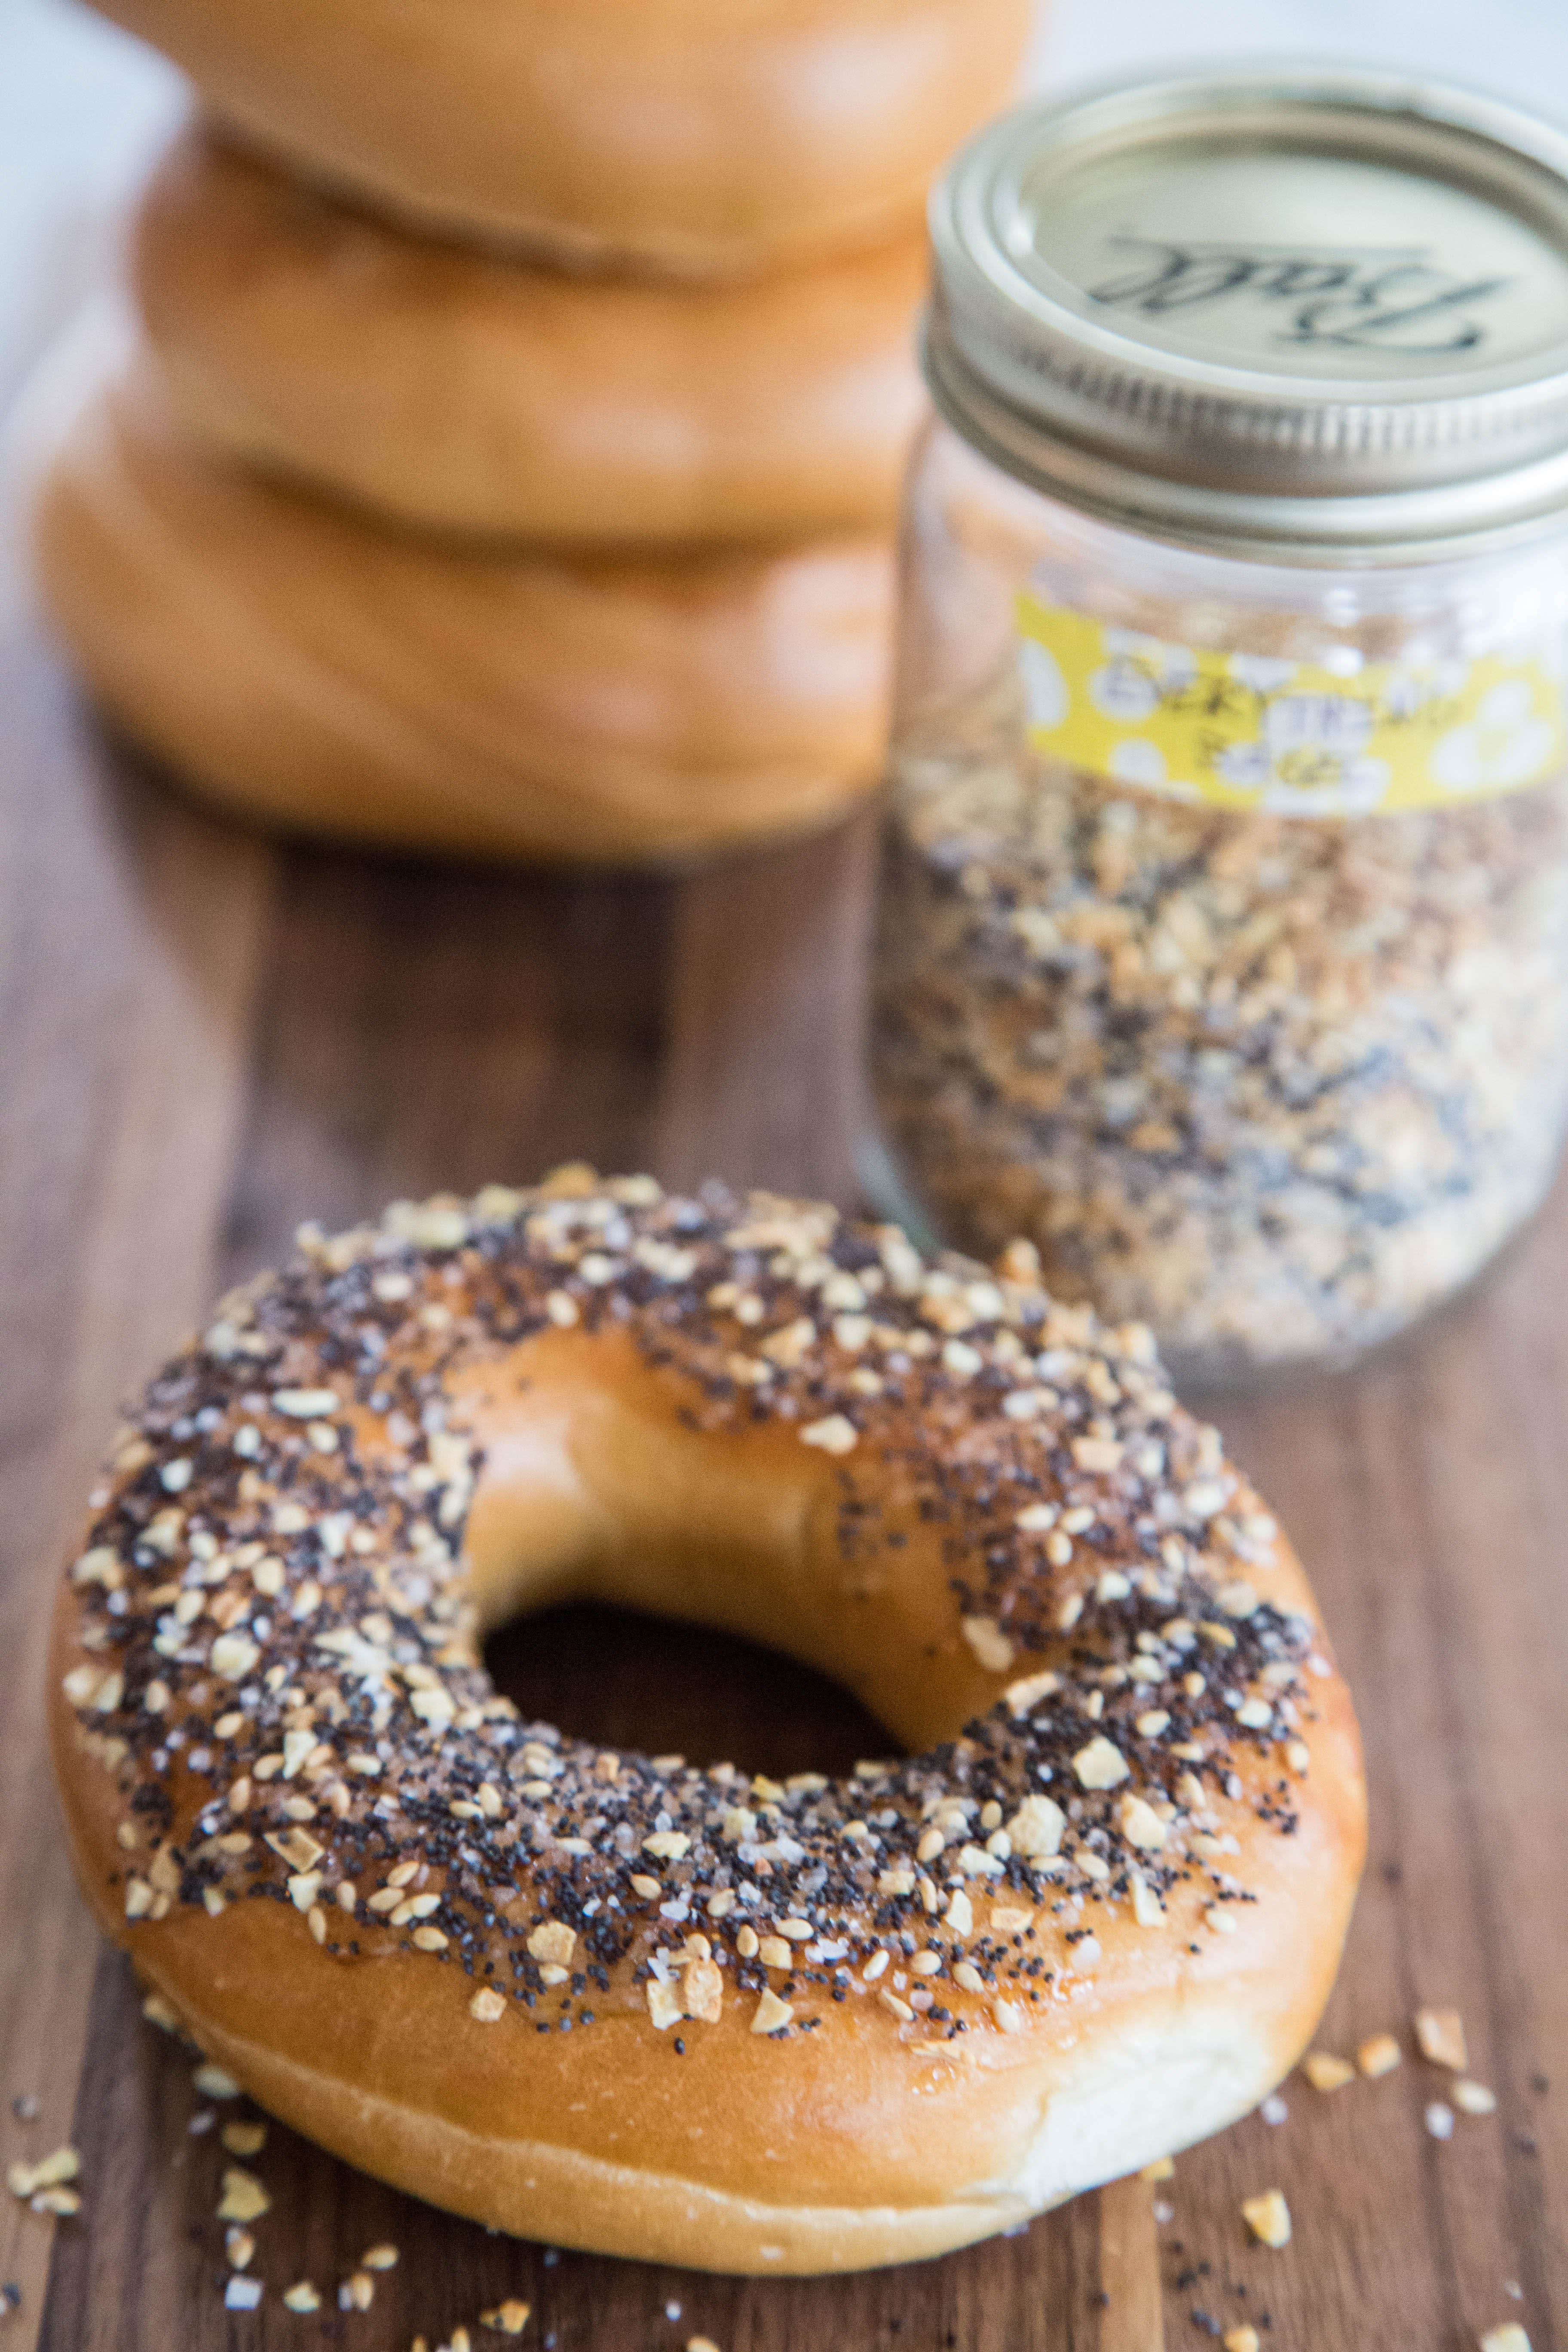 How to Make the Best Everything Bagel Seasoning - Perry's Plate